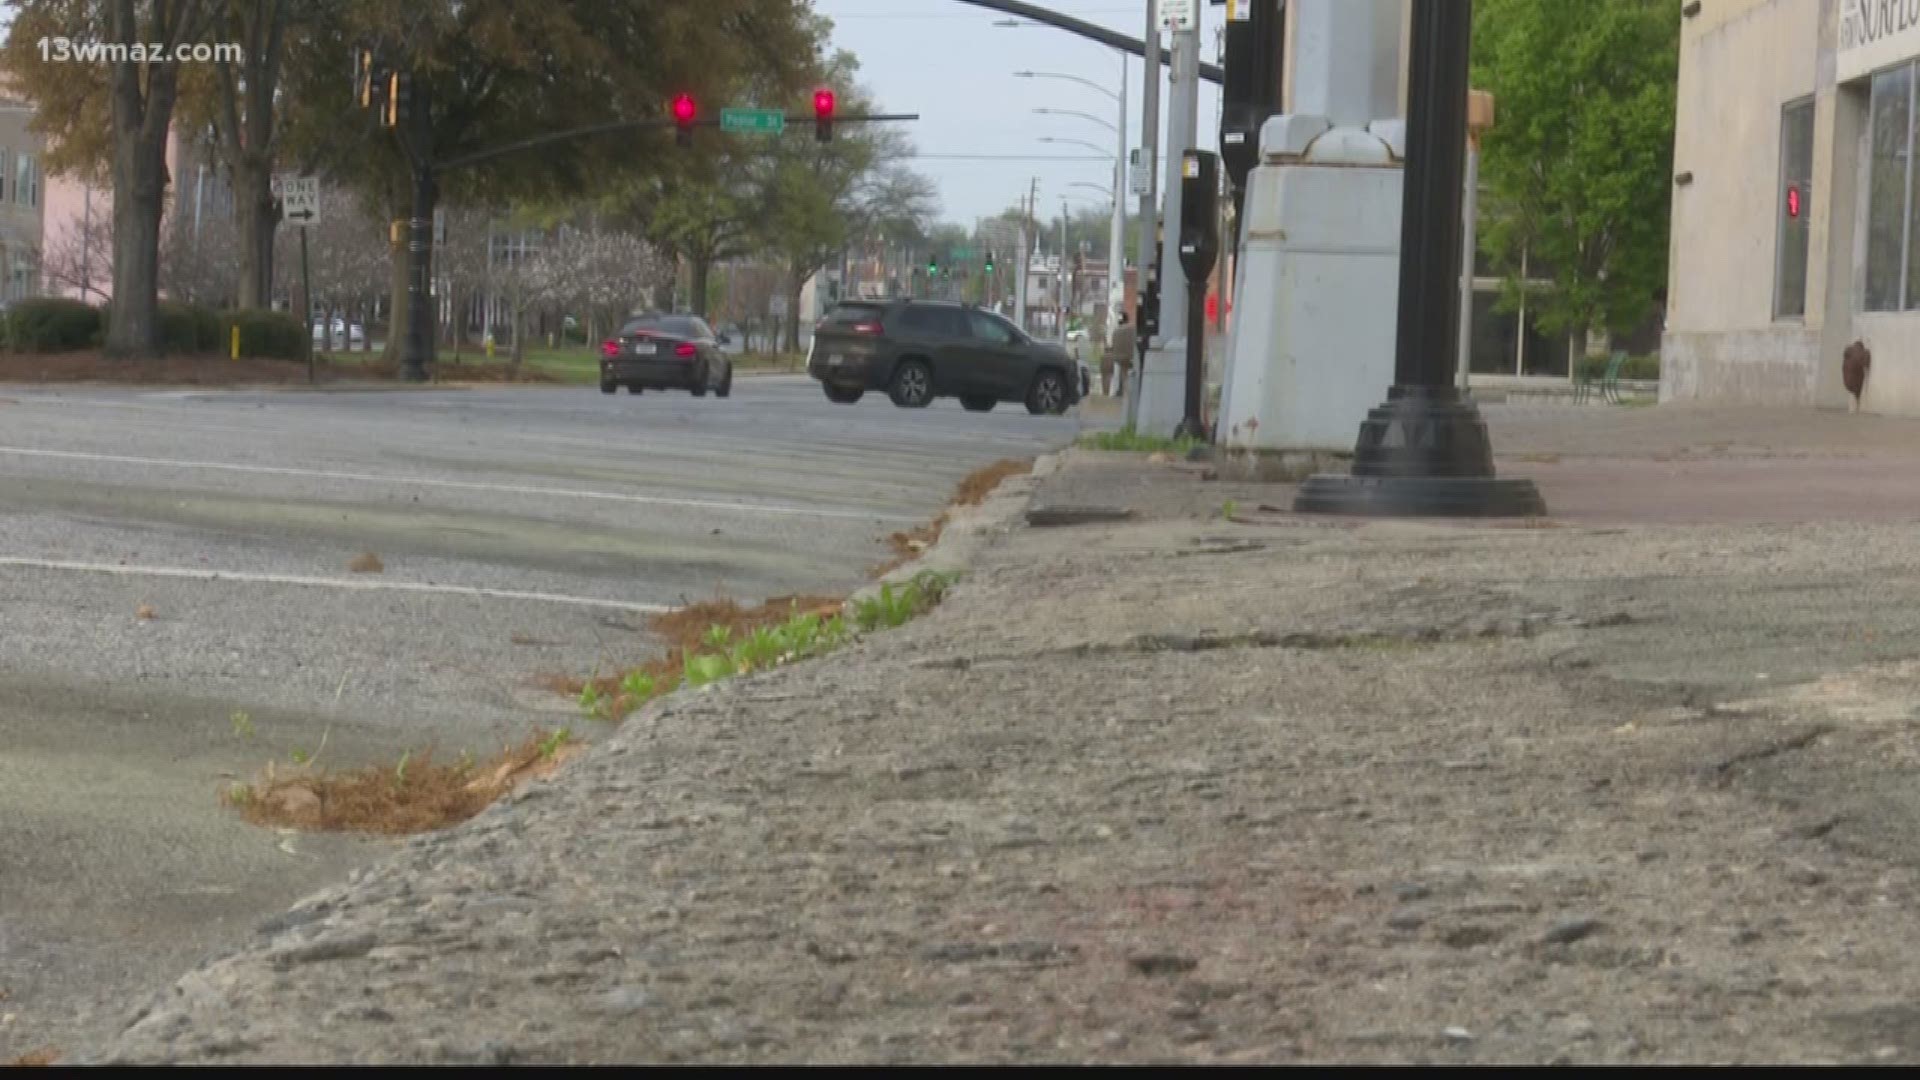 With the new website, you'll be able to report dangerous intersections and sidewalks you feel need to be repaired. Bibb County residents can also report missing curb ramps, overgrown sidewalks and even missing crosswalks.